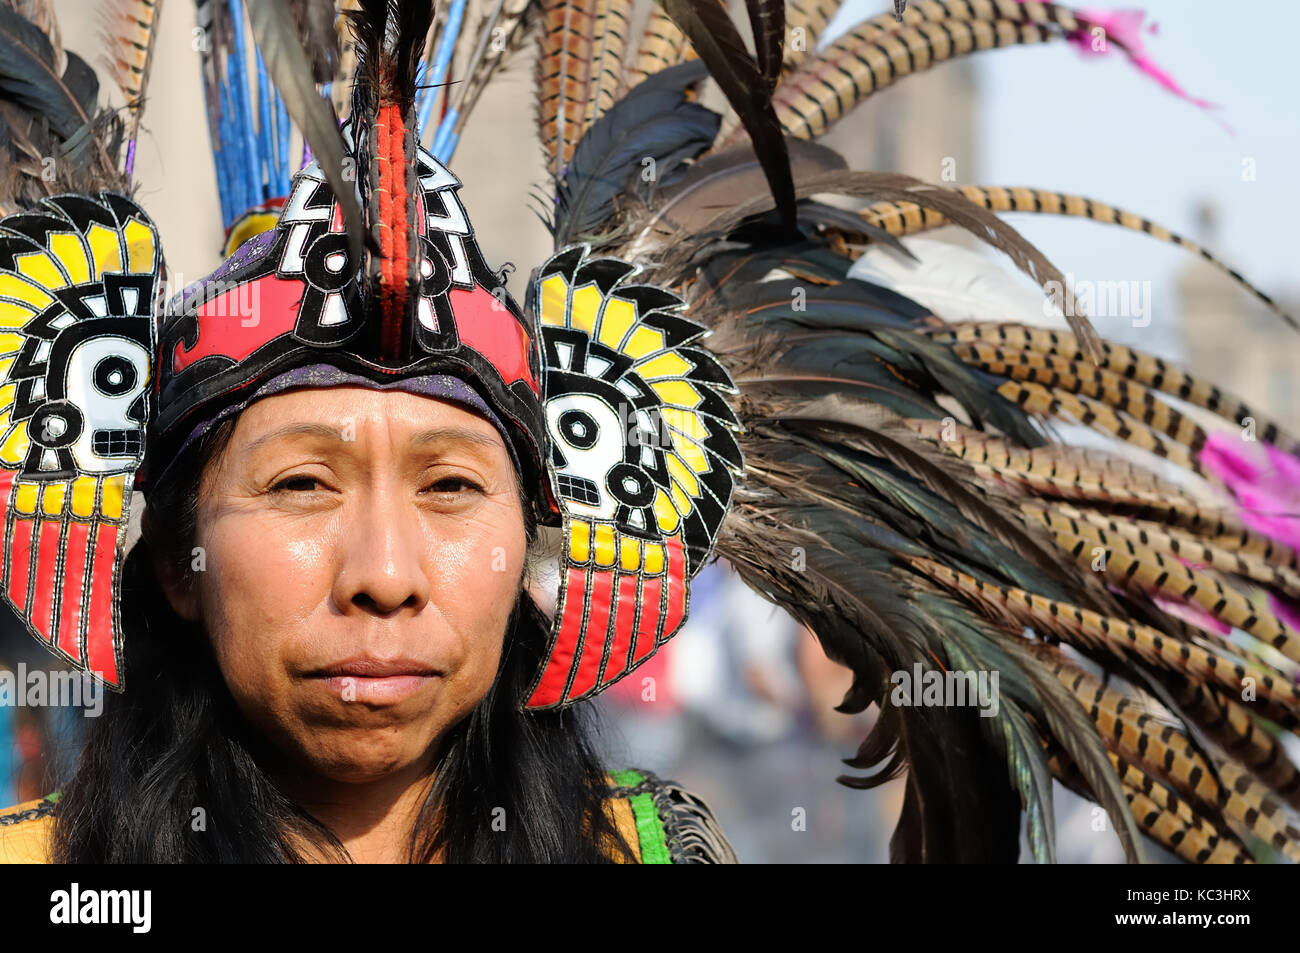 MEXICO, MEXICO - FEBRUARY 16:  Portrait of the dancer performing traditional Aztec dances in the capital city of Mexico on February 16, 2013 Stock Photo